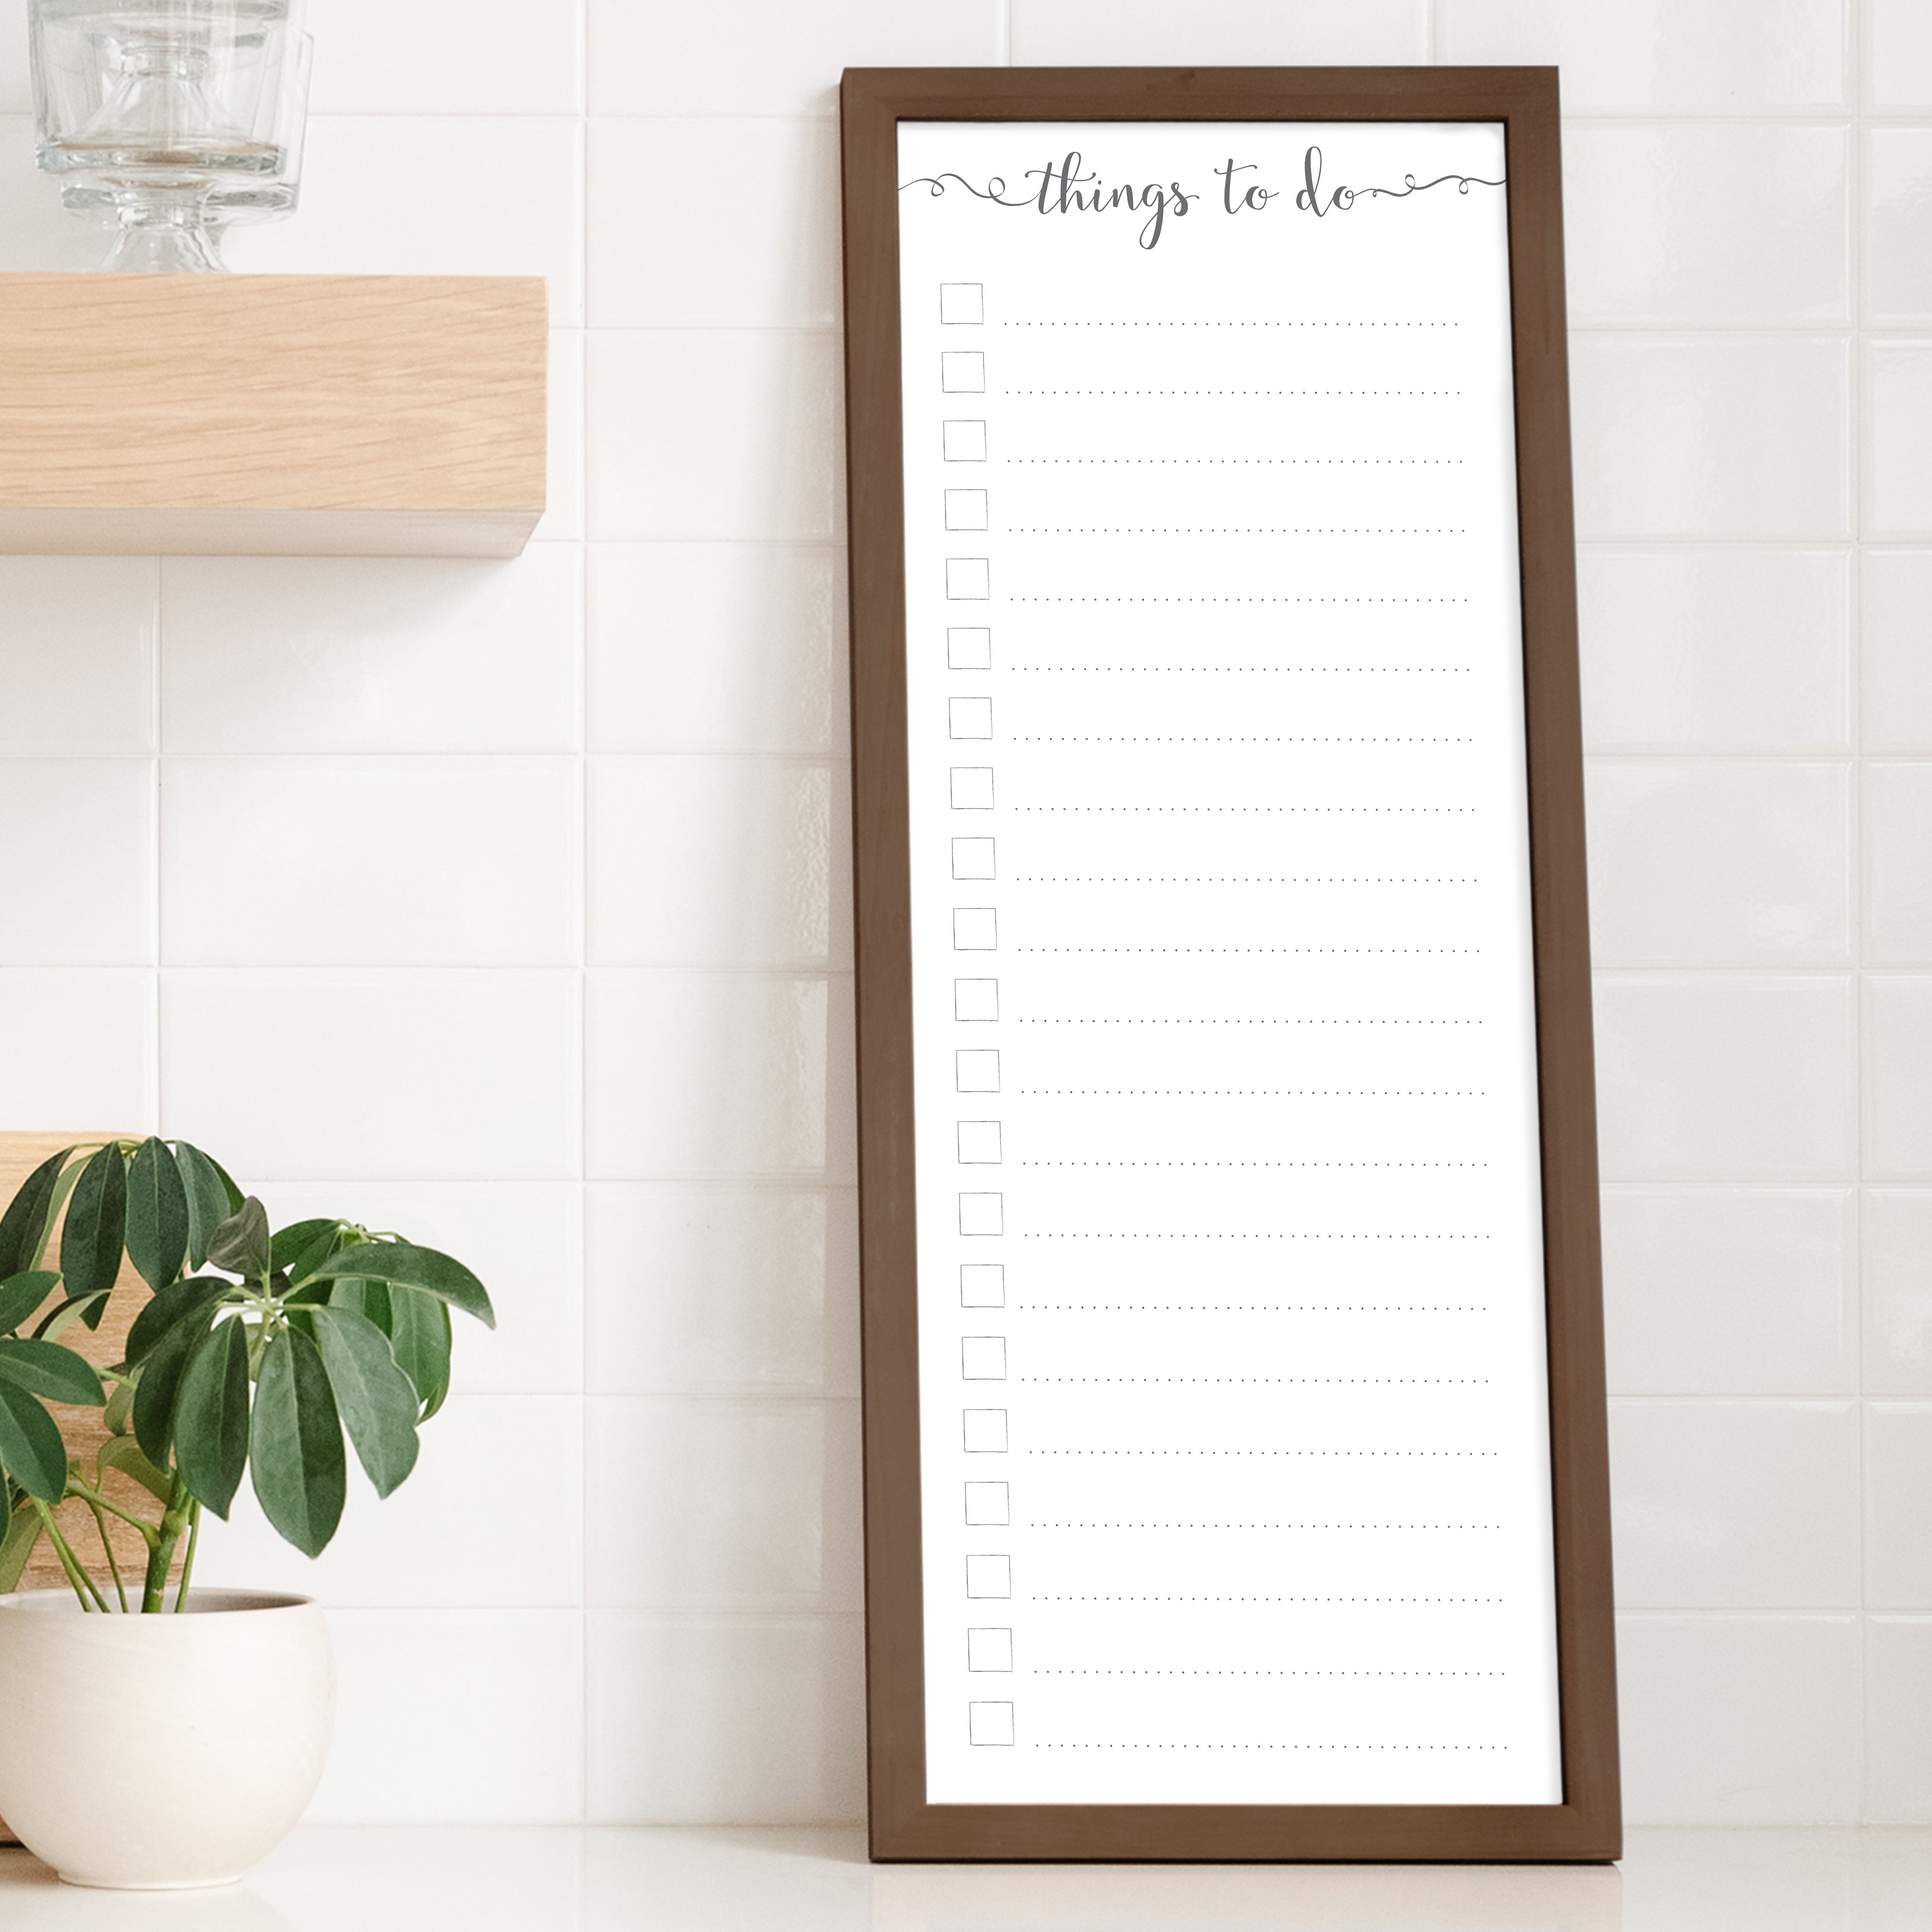 A framed whiteboard to do list hanging on the wall